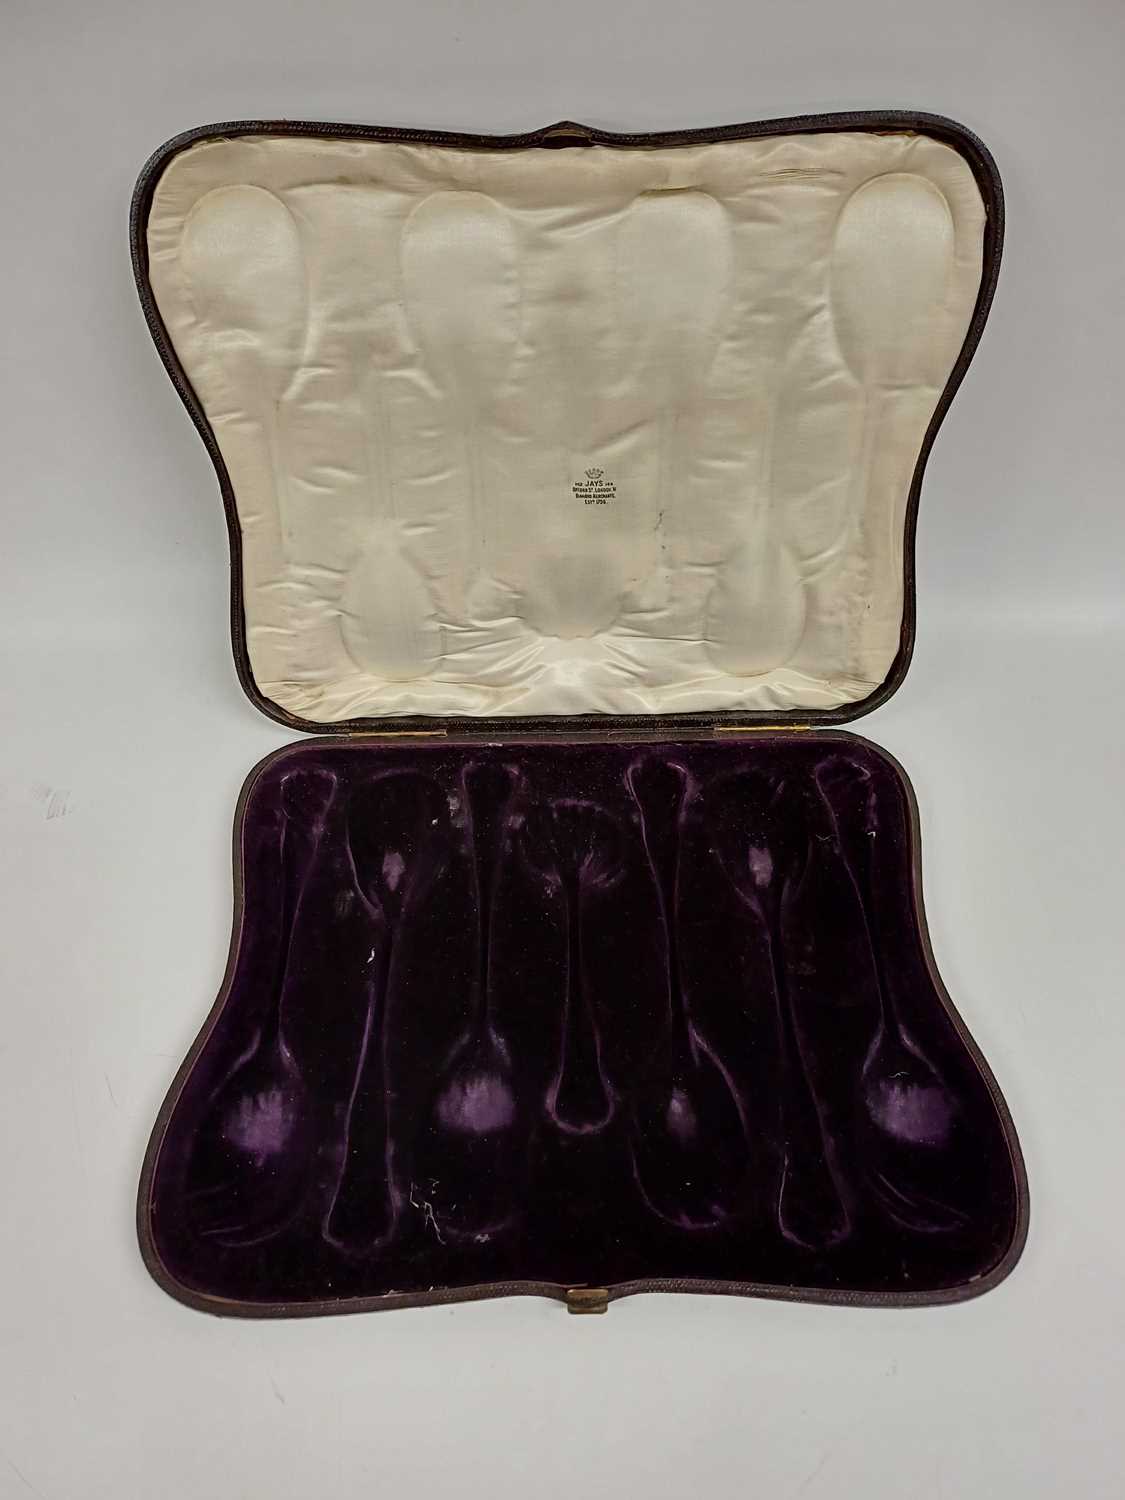 A Cased Set of Six Victorian Parcel-Gilt Silver Berry-Spoons and a Sifting Spoon, by Henry John Lia - Image 6 of 10